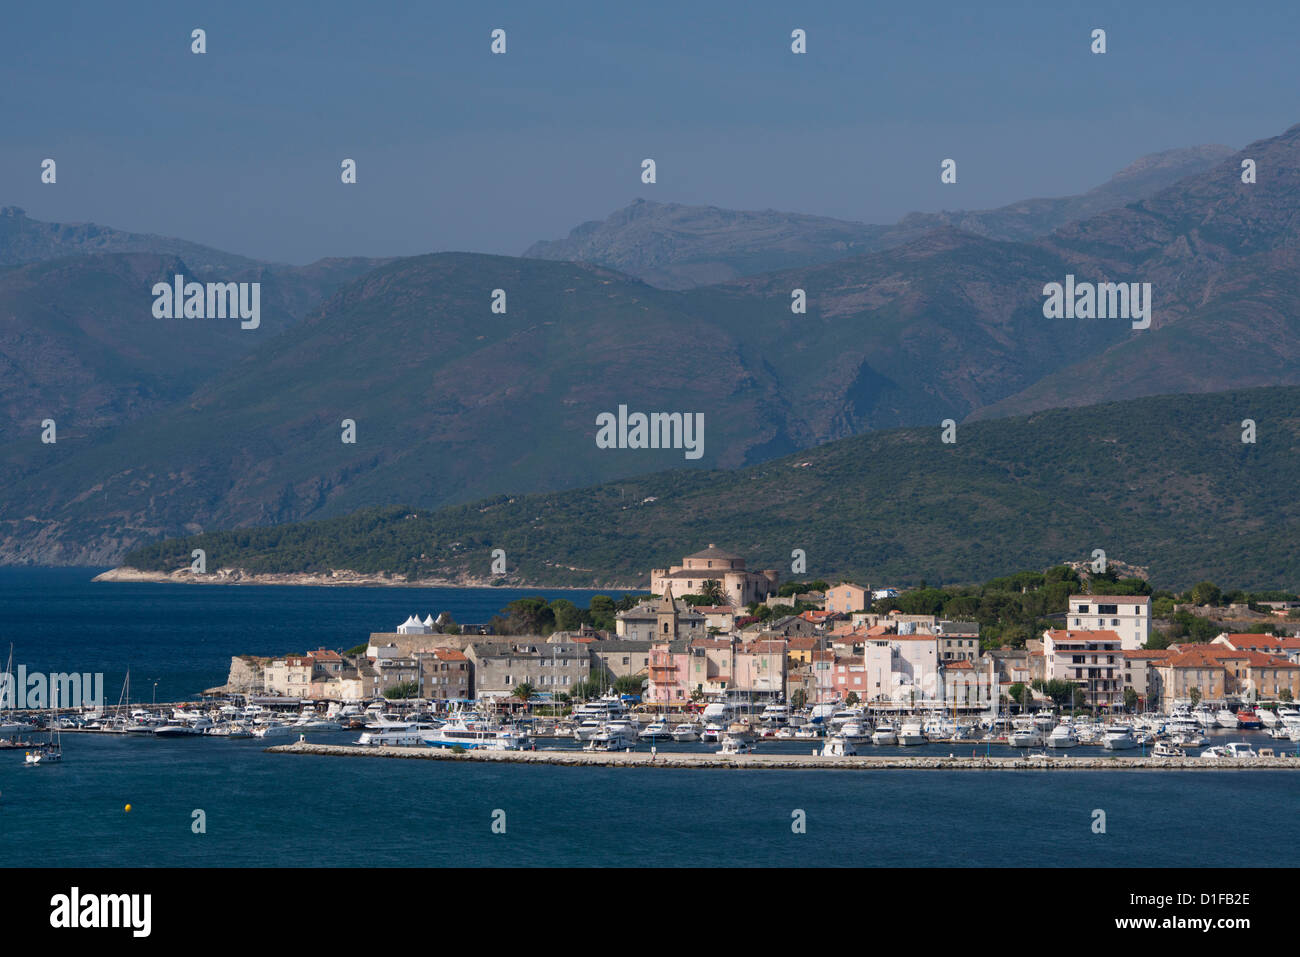 A view of St. Florent and distant mountains in the Nebbio region of nothern Corsica, France, Mediterranean, Europe Stock Photo